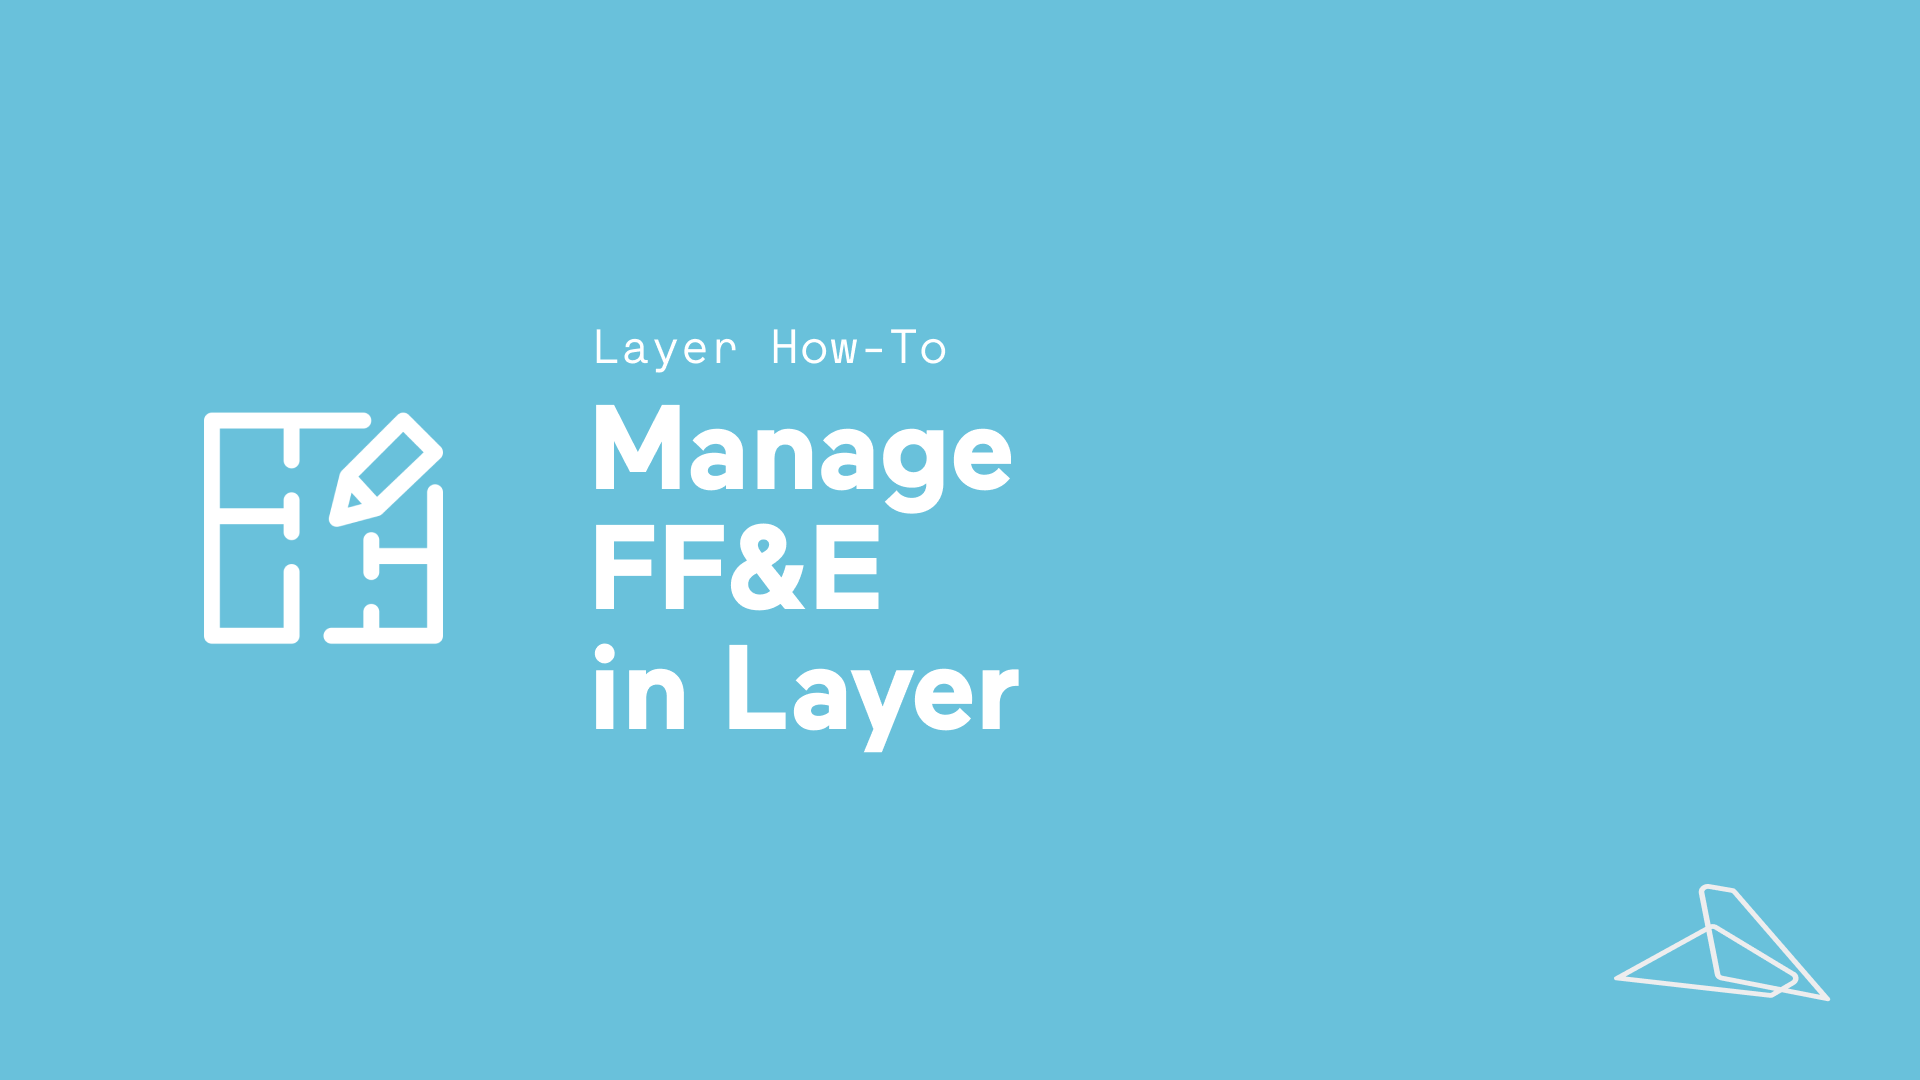 How to manage FF&E in Layer